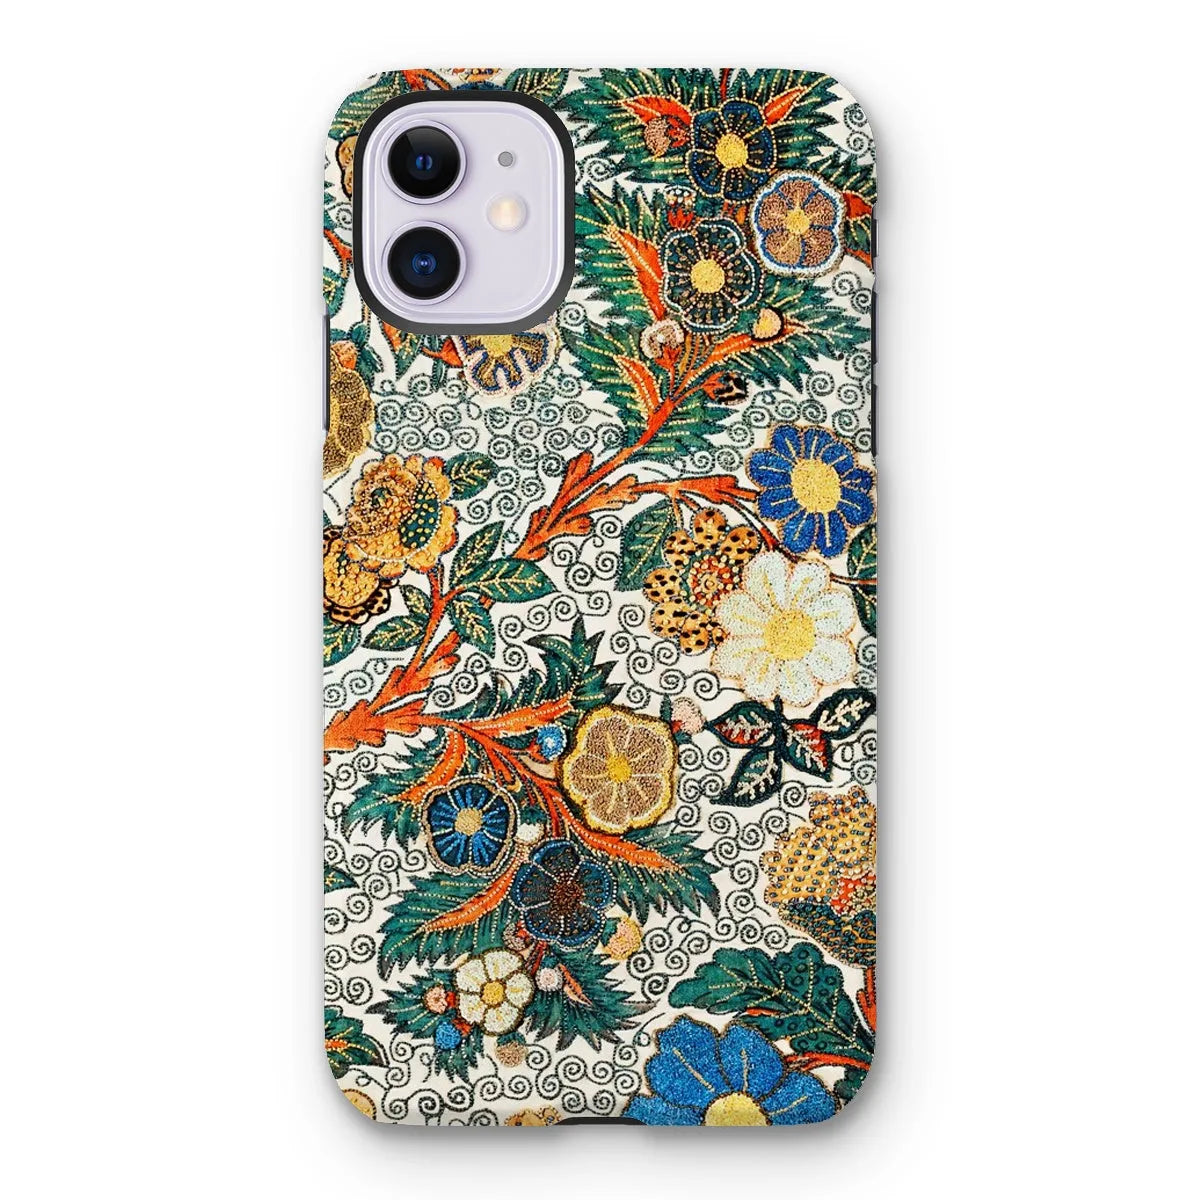 Blossomewhere Japanese Tapestry Art Phone Case - Iphone 11 / Matte - Mobile Phone Cases - Aesthetic Art